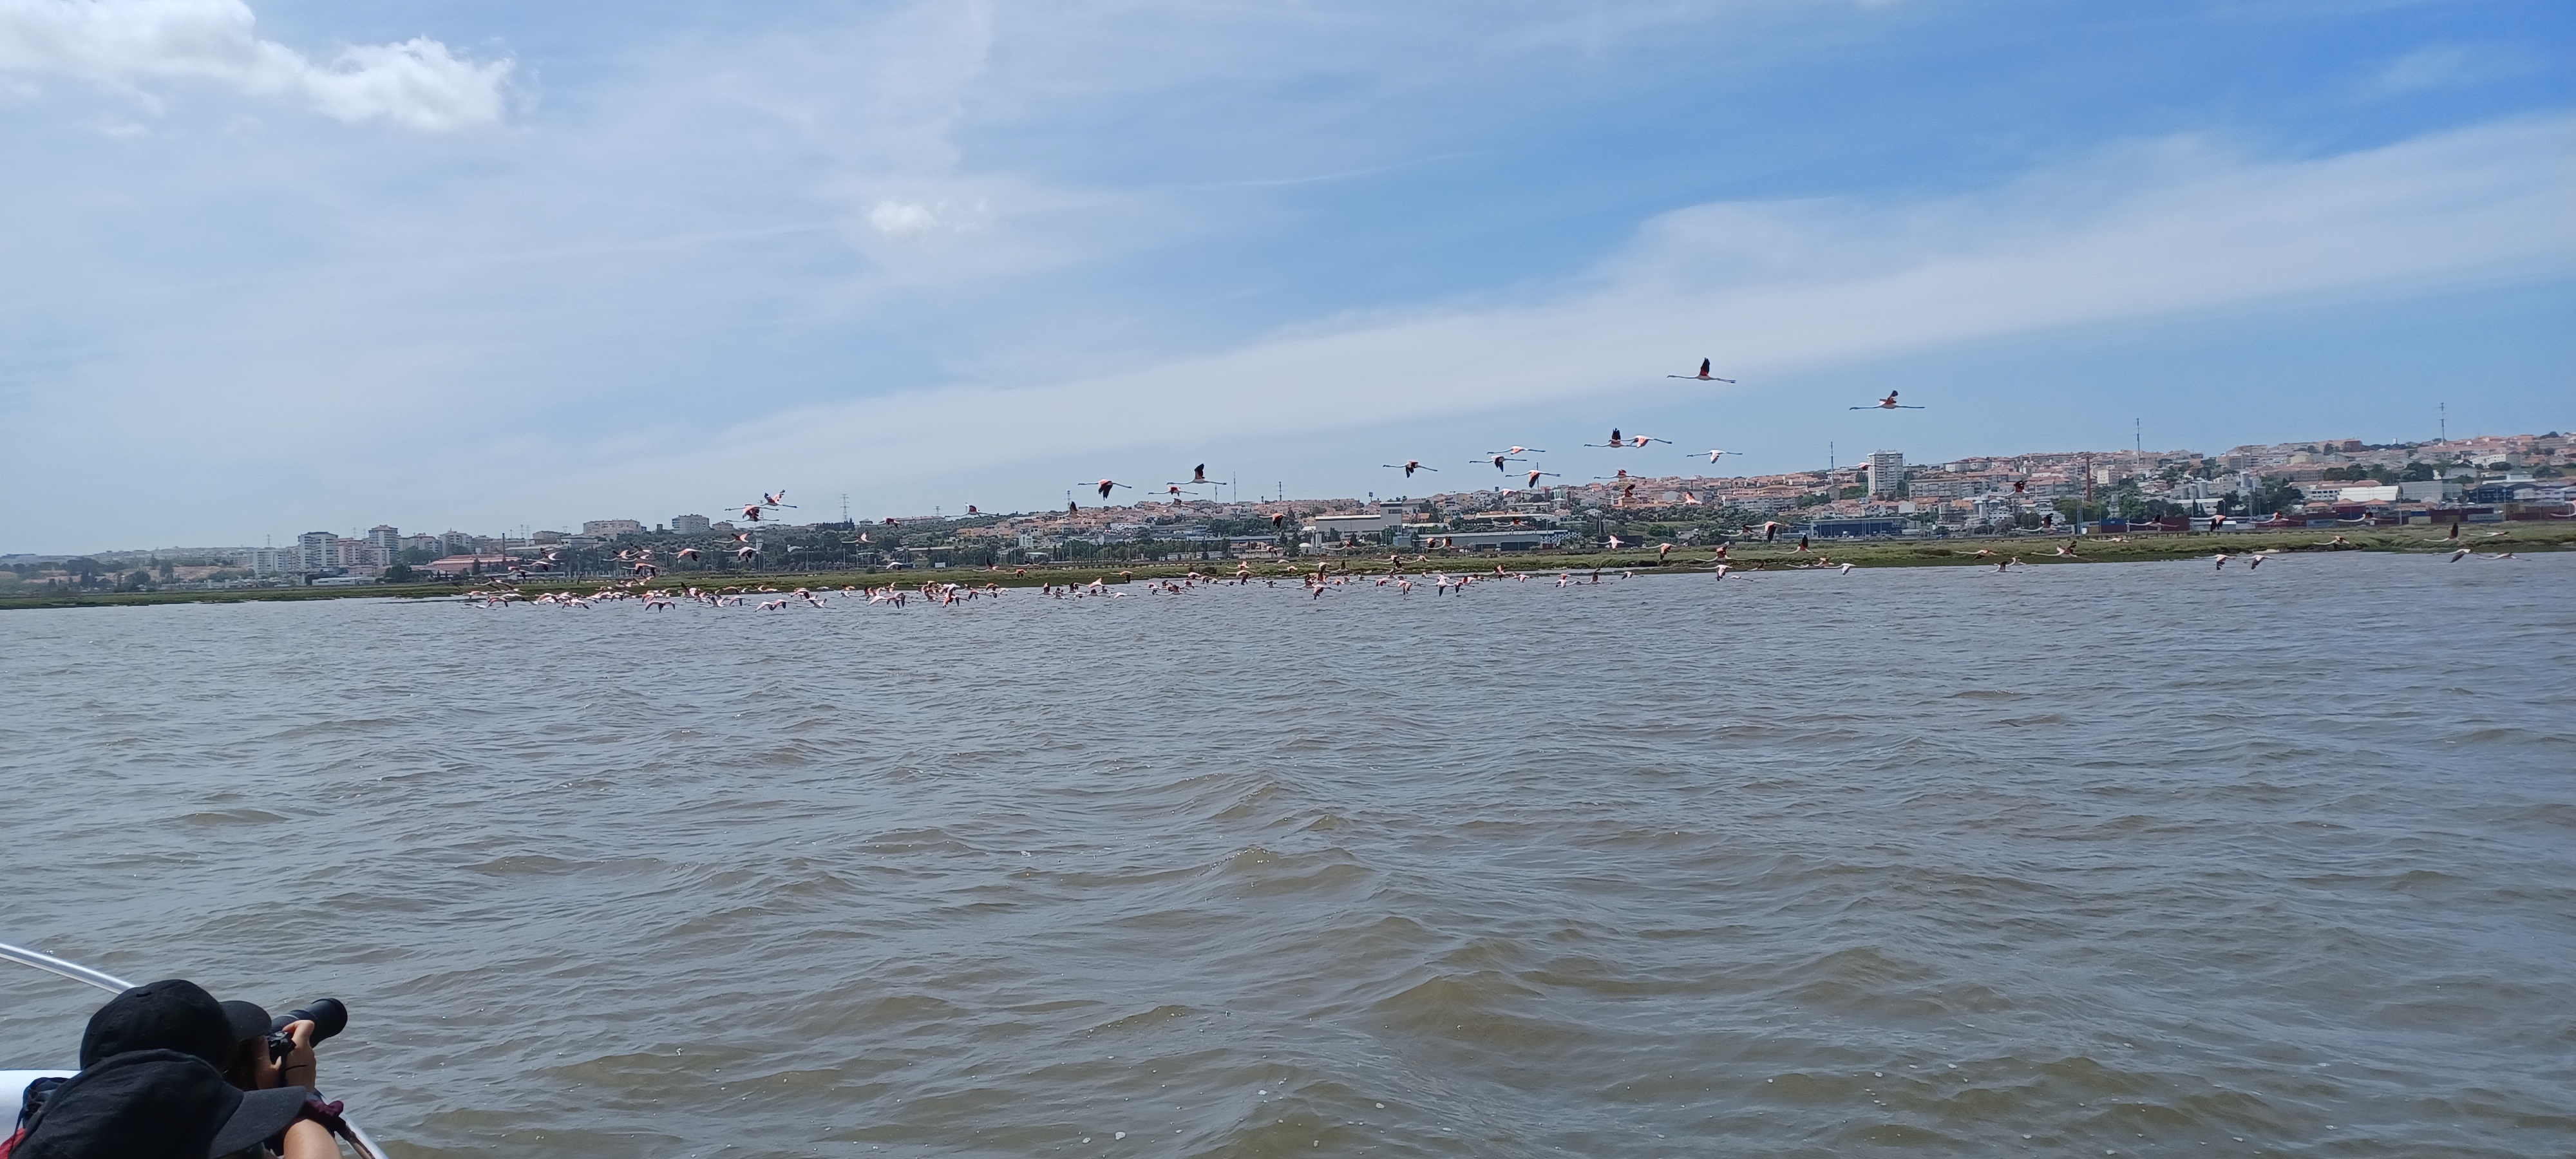 Lisbon Birdwatching boat tour on Tagus natural reserve